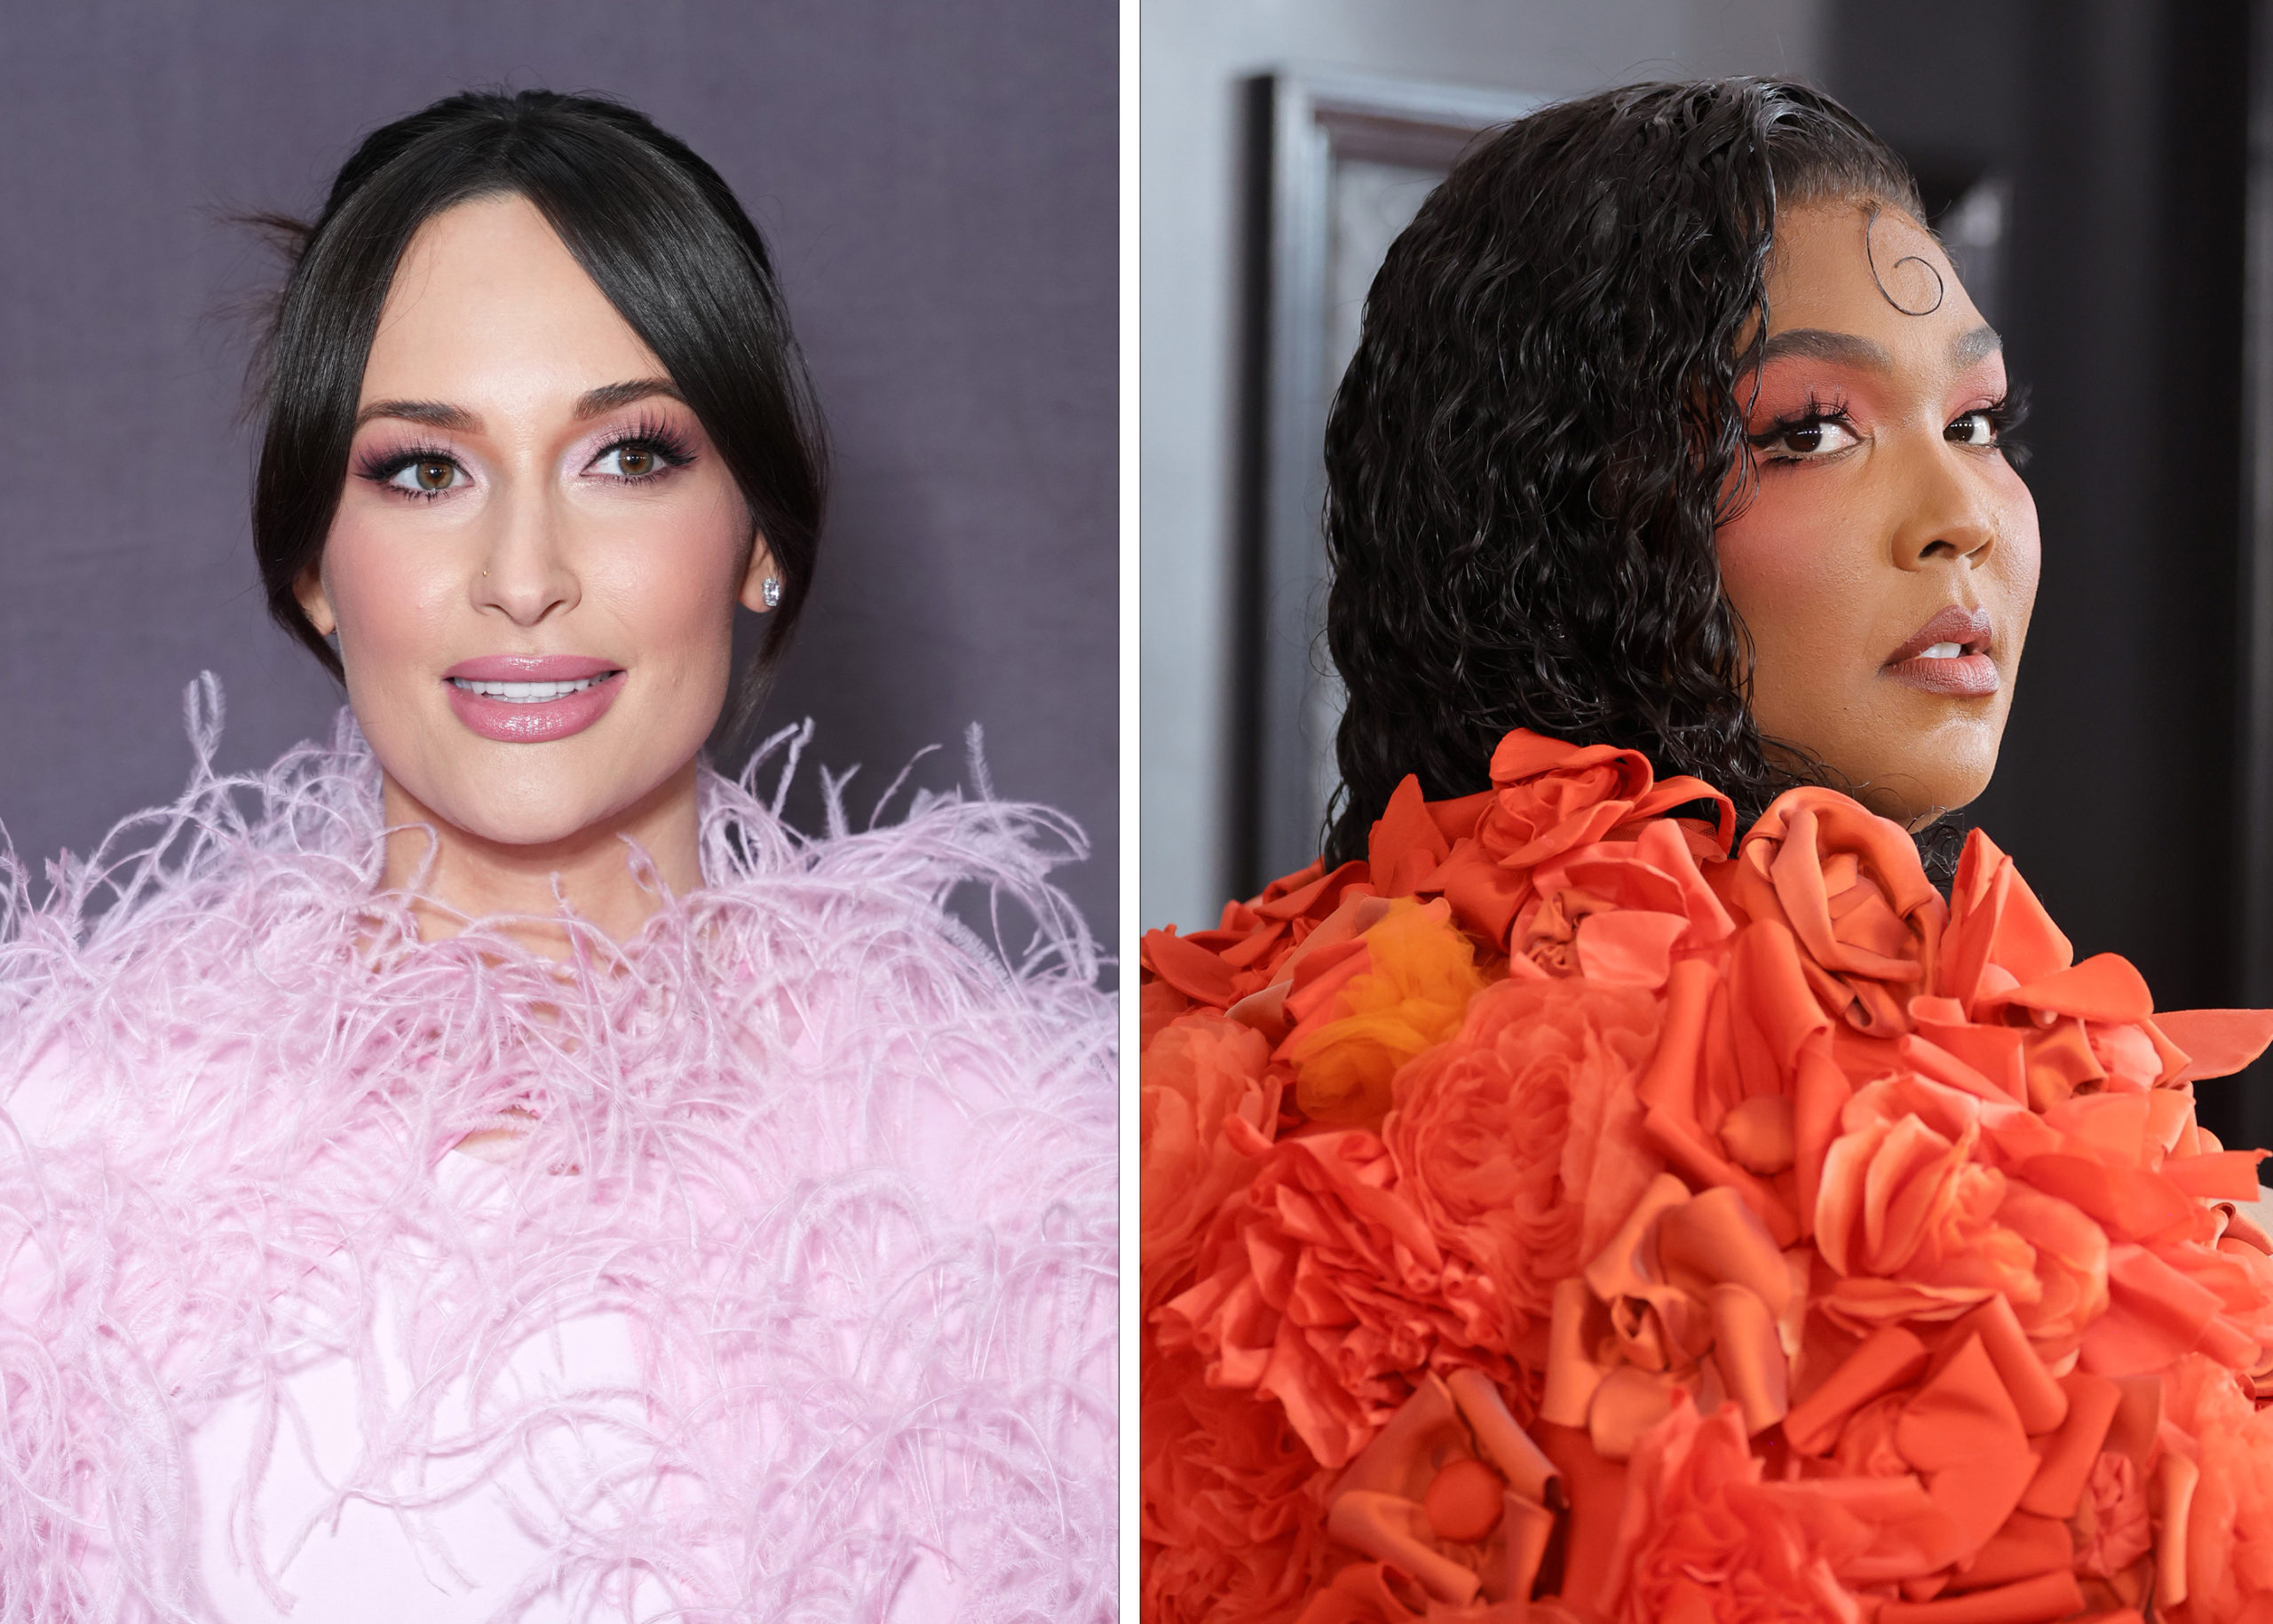 The Liquid Blush Kacey Musgraves and Lizzo Both Wore to the
Grammys